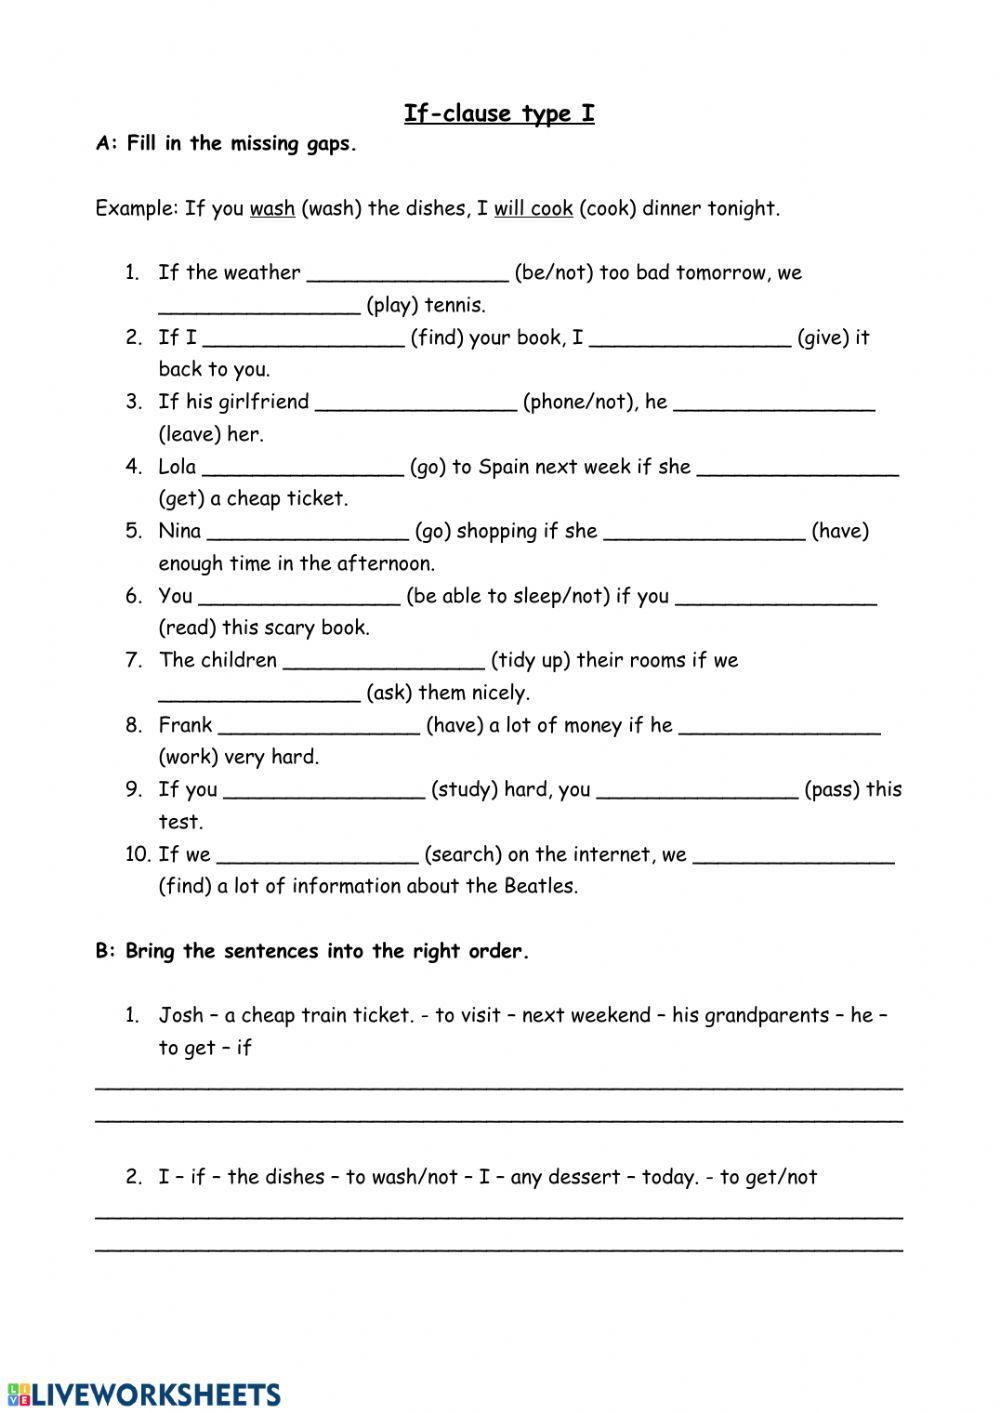 conditional clauses-type 1 - ESL worksheet by anamatos